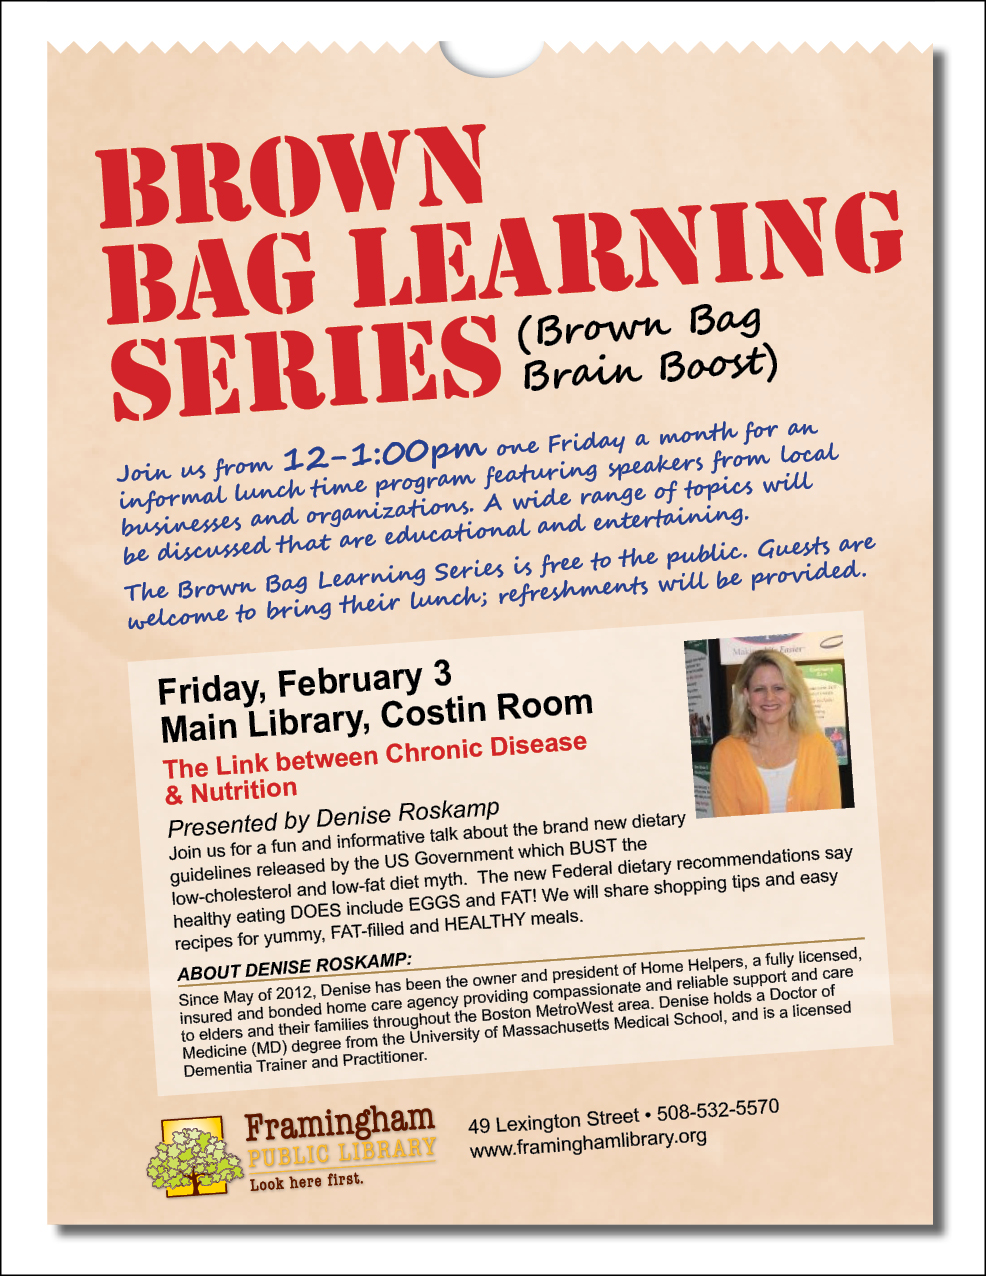 Brown Bag Learning Series: The Link between Chronic Disease & Nutrition thumbnail Photo